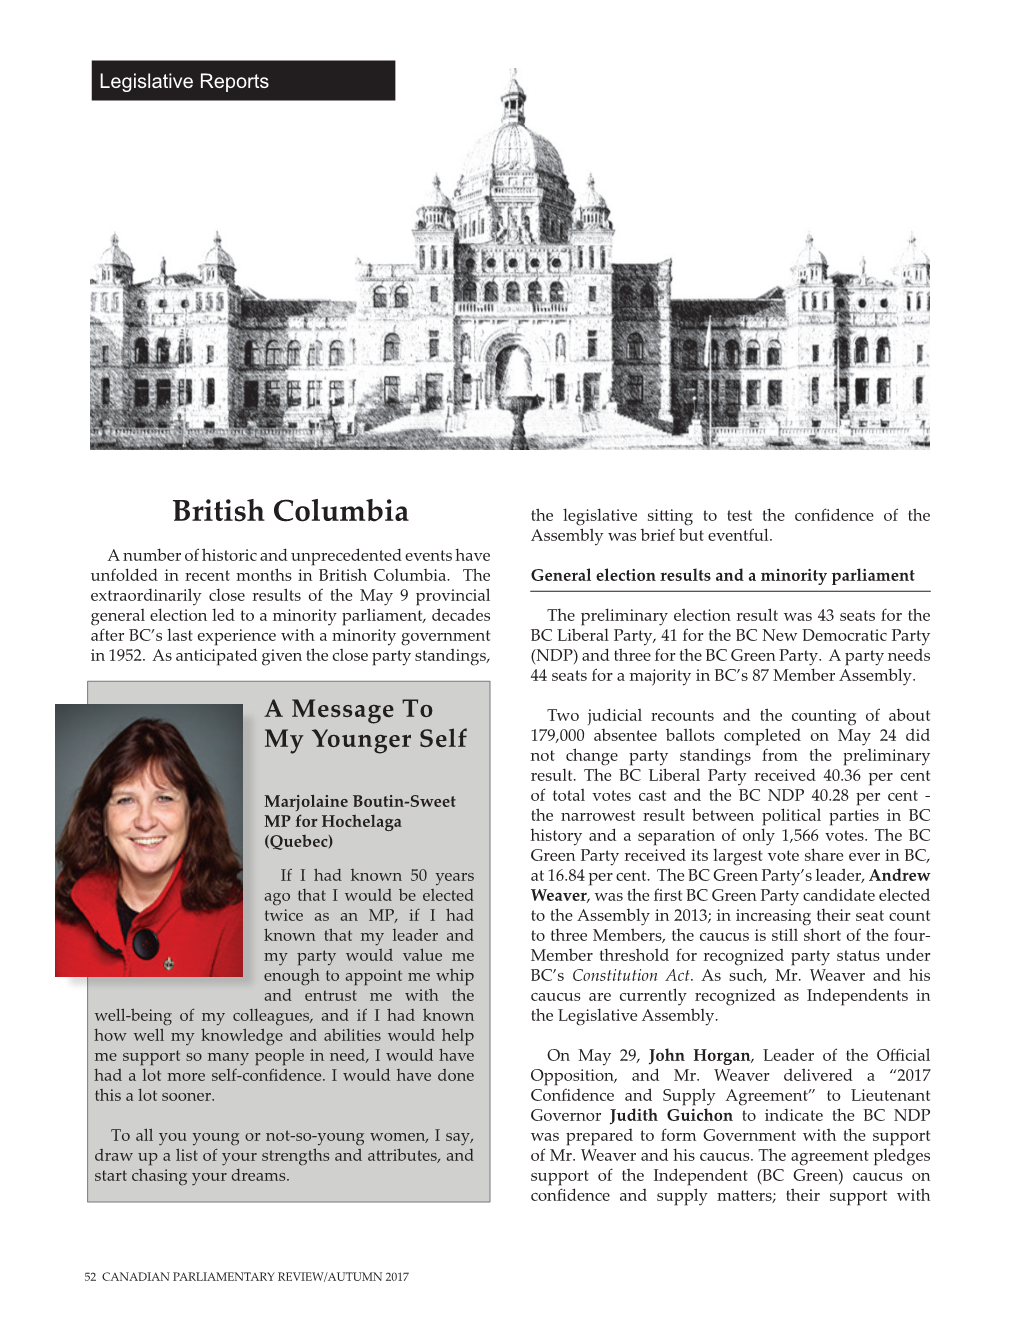 British Columbia the Legislative Sitting to Test the Confidence of the Assembly Was Brief but Eventful